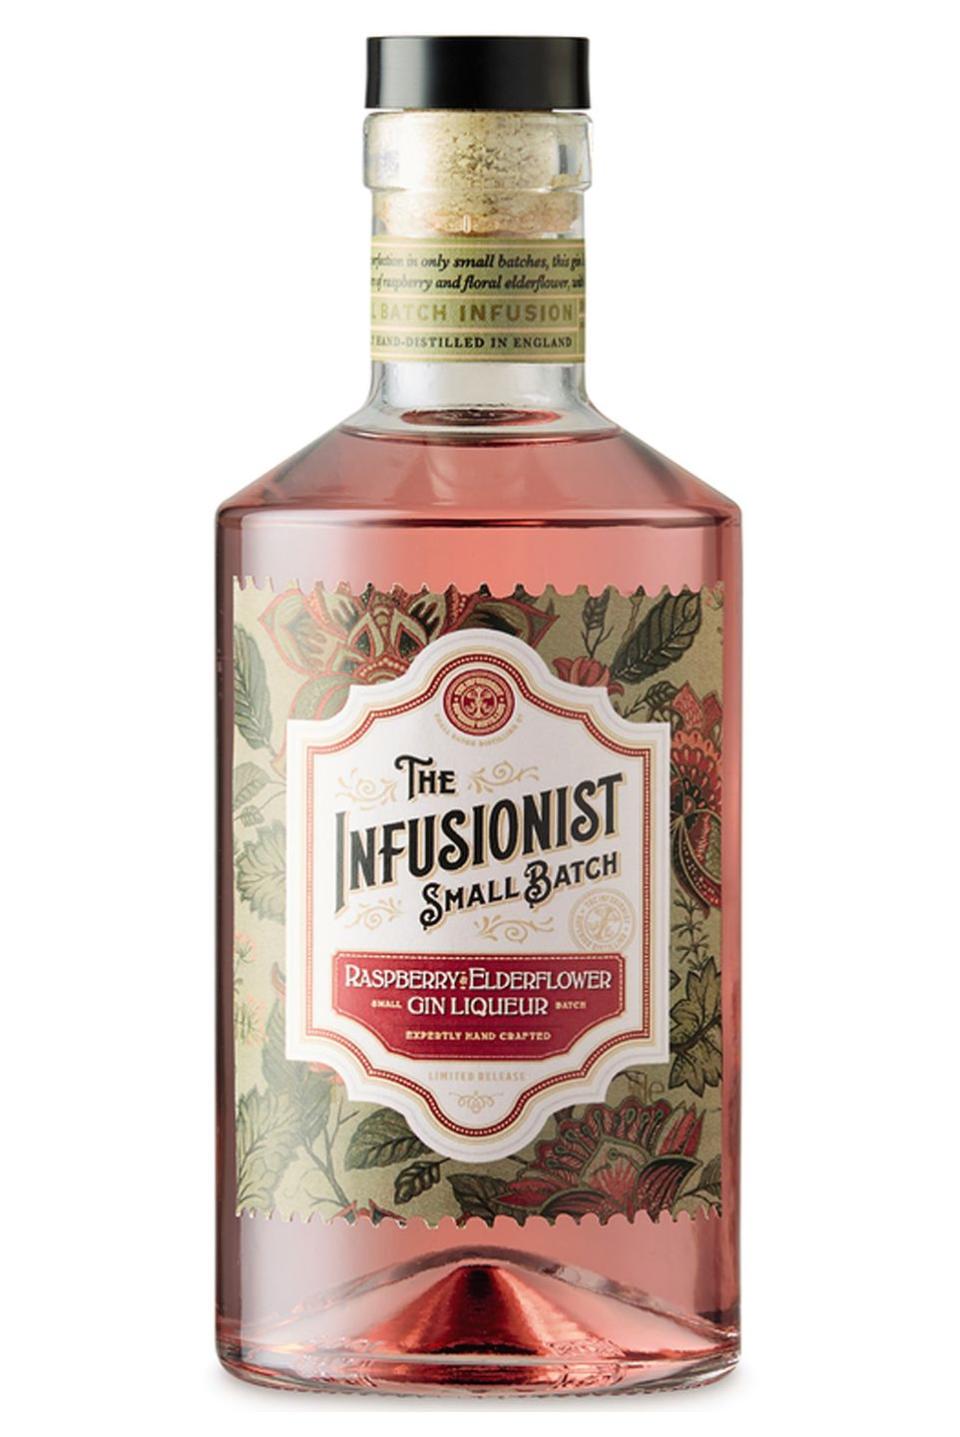 <p>Another pink gin for your cabinet, the Infusionist Raspberry & Elderflower Gin Liqueur is a floral liqueur with "balanced and subtle" flavour notes of raspberries and elderflower. </p><p>Infusionist Raspberry & Elderflower Gin Liqueur, £9.99, 50ml</p>